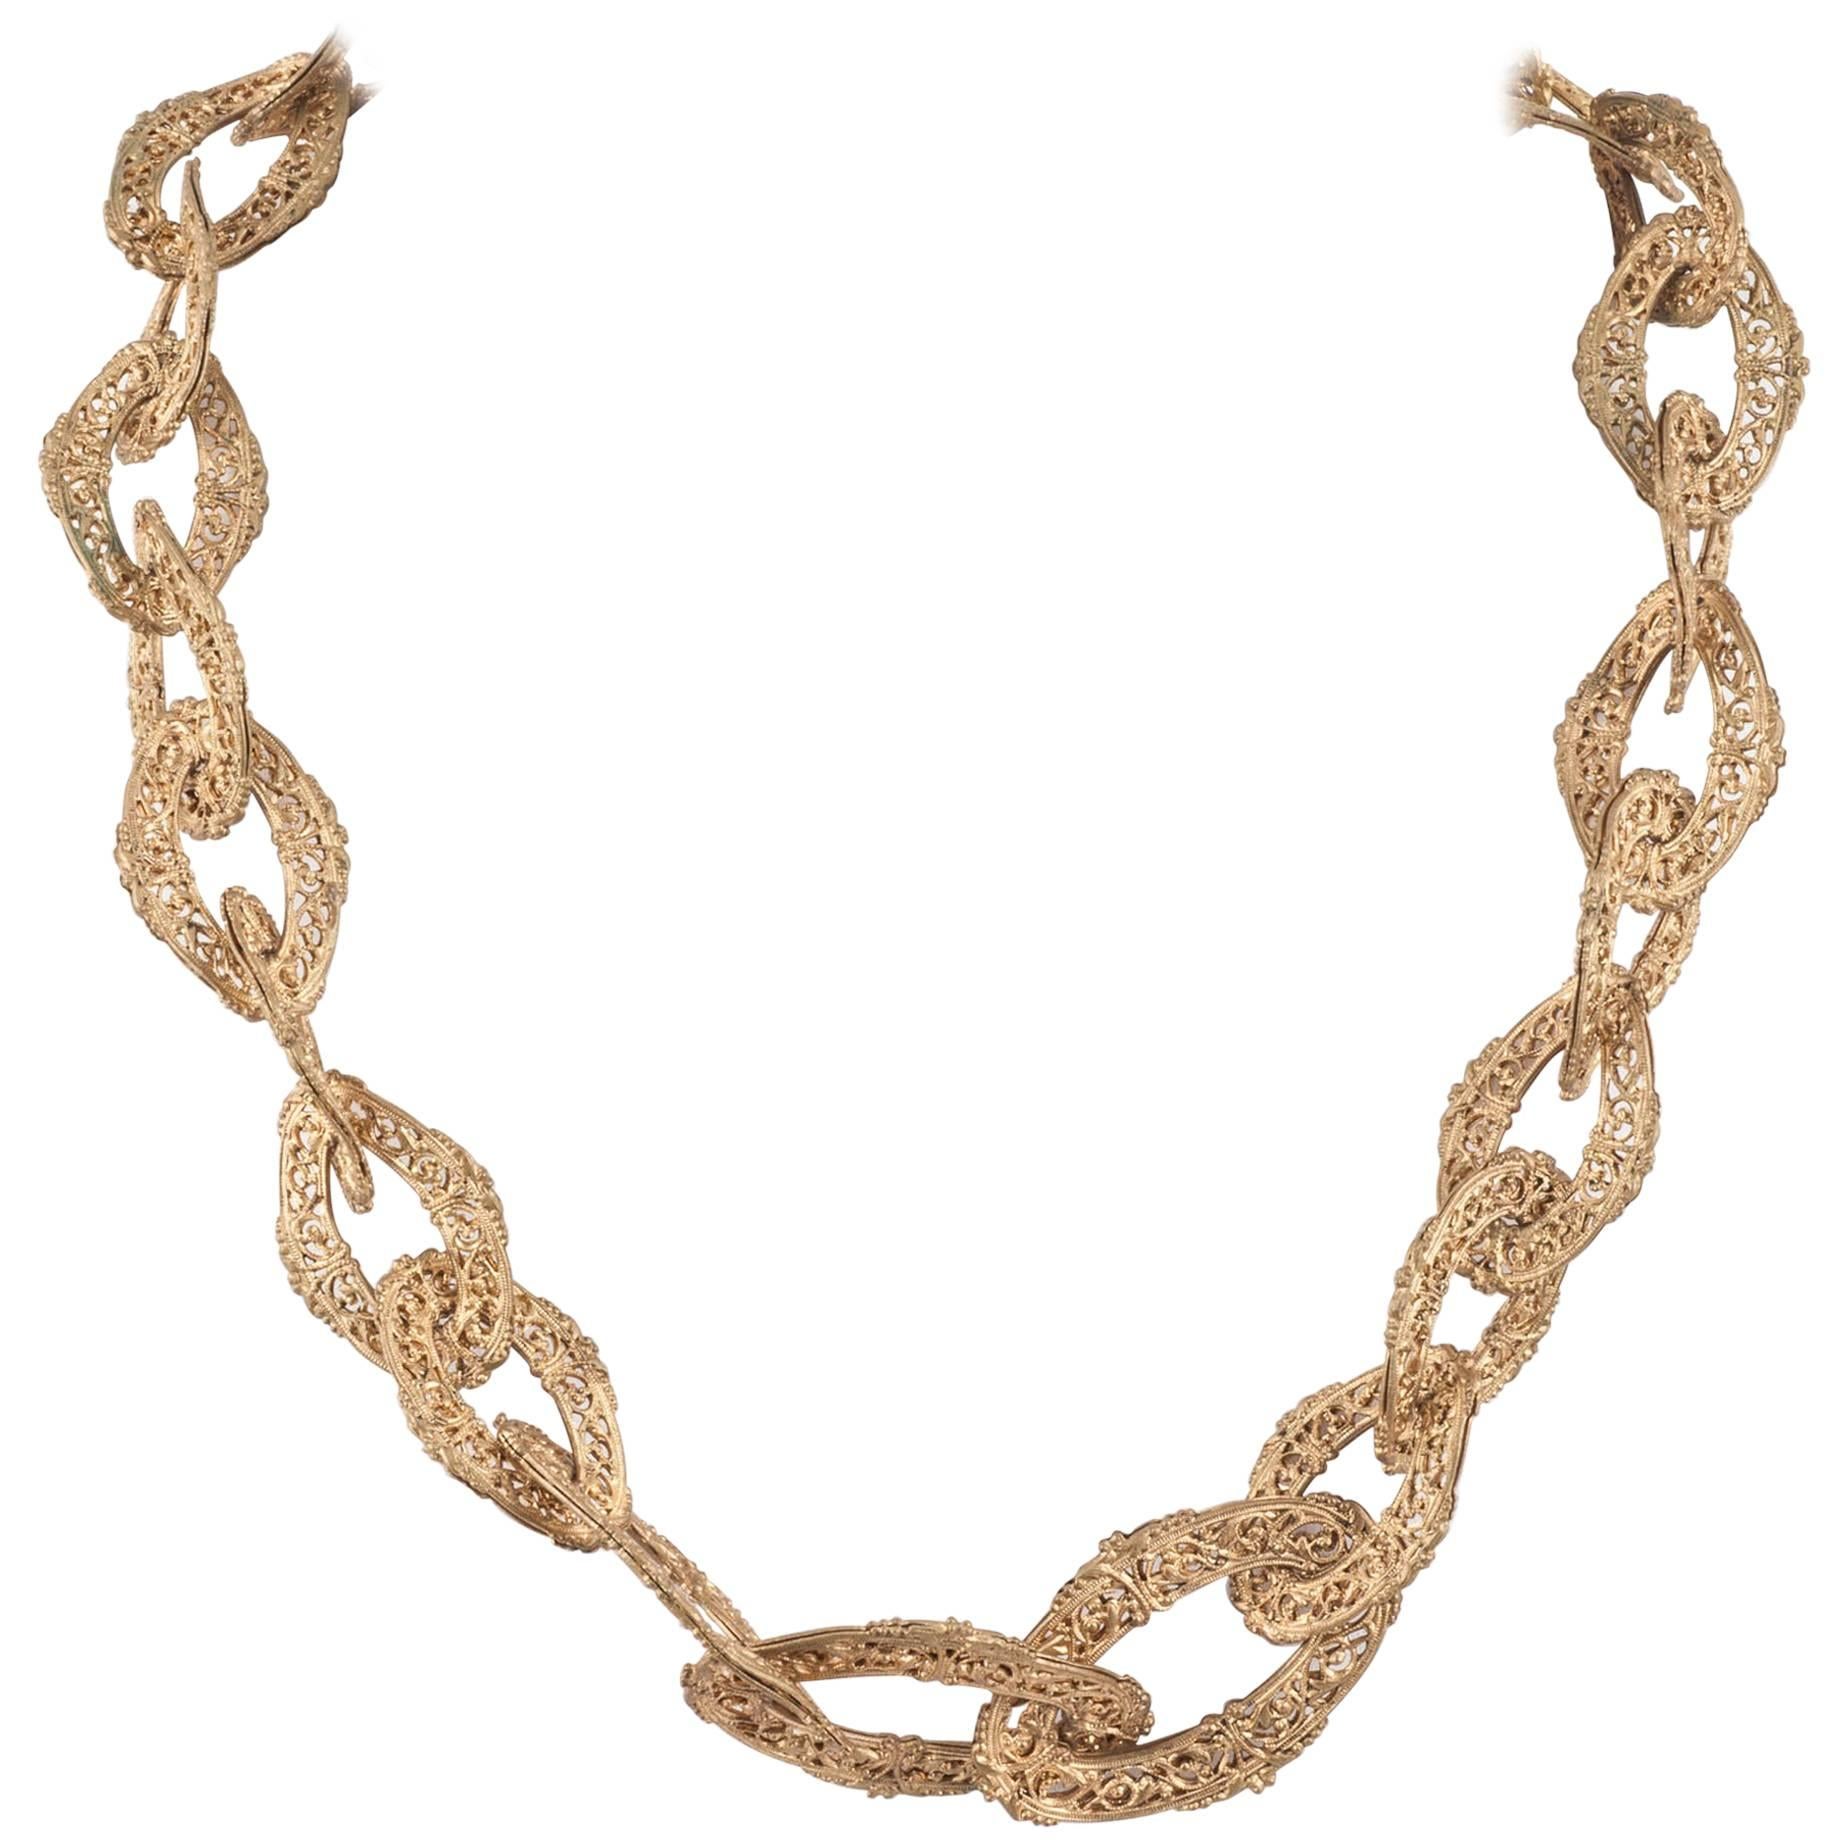 A large antiqued gold filigree link chain necklace, Goossens for Chanel, 1960s. For Sale